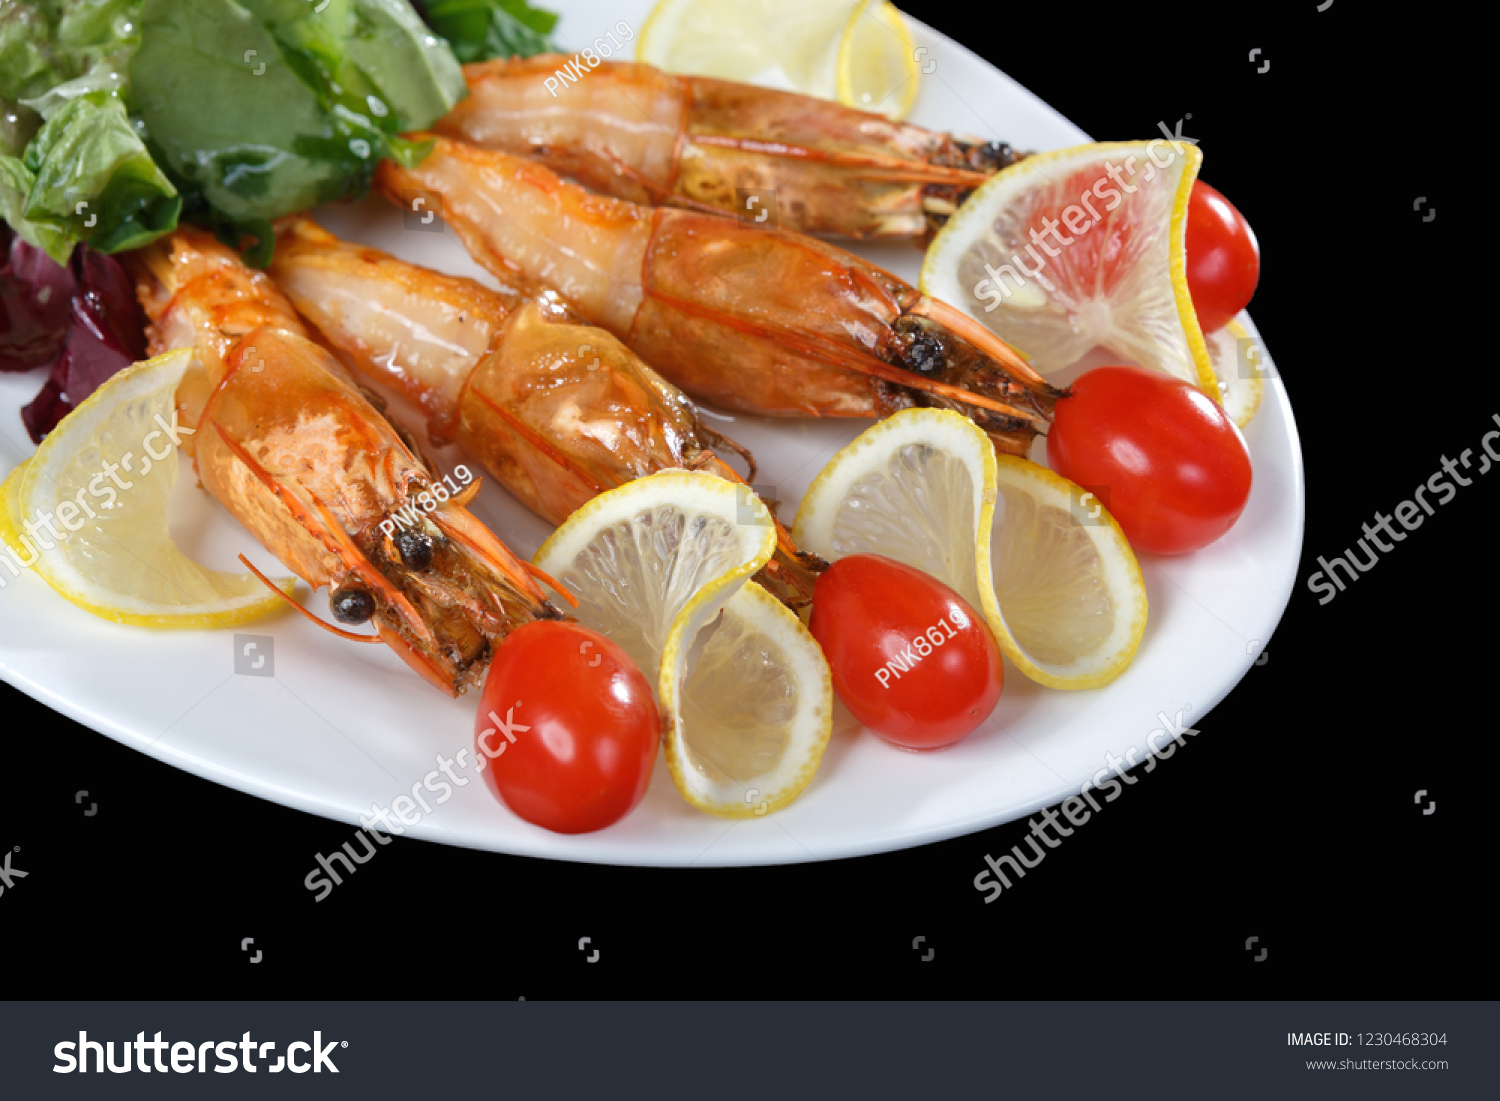 Shrimps, tomatoes and lemon are beautifully laid out on a dish on a black background. Freshly prepared shrimp #1230468304